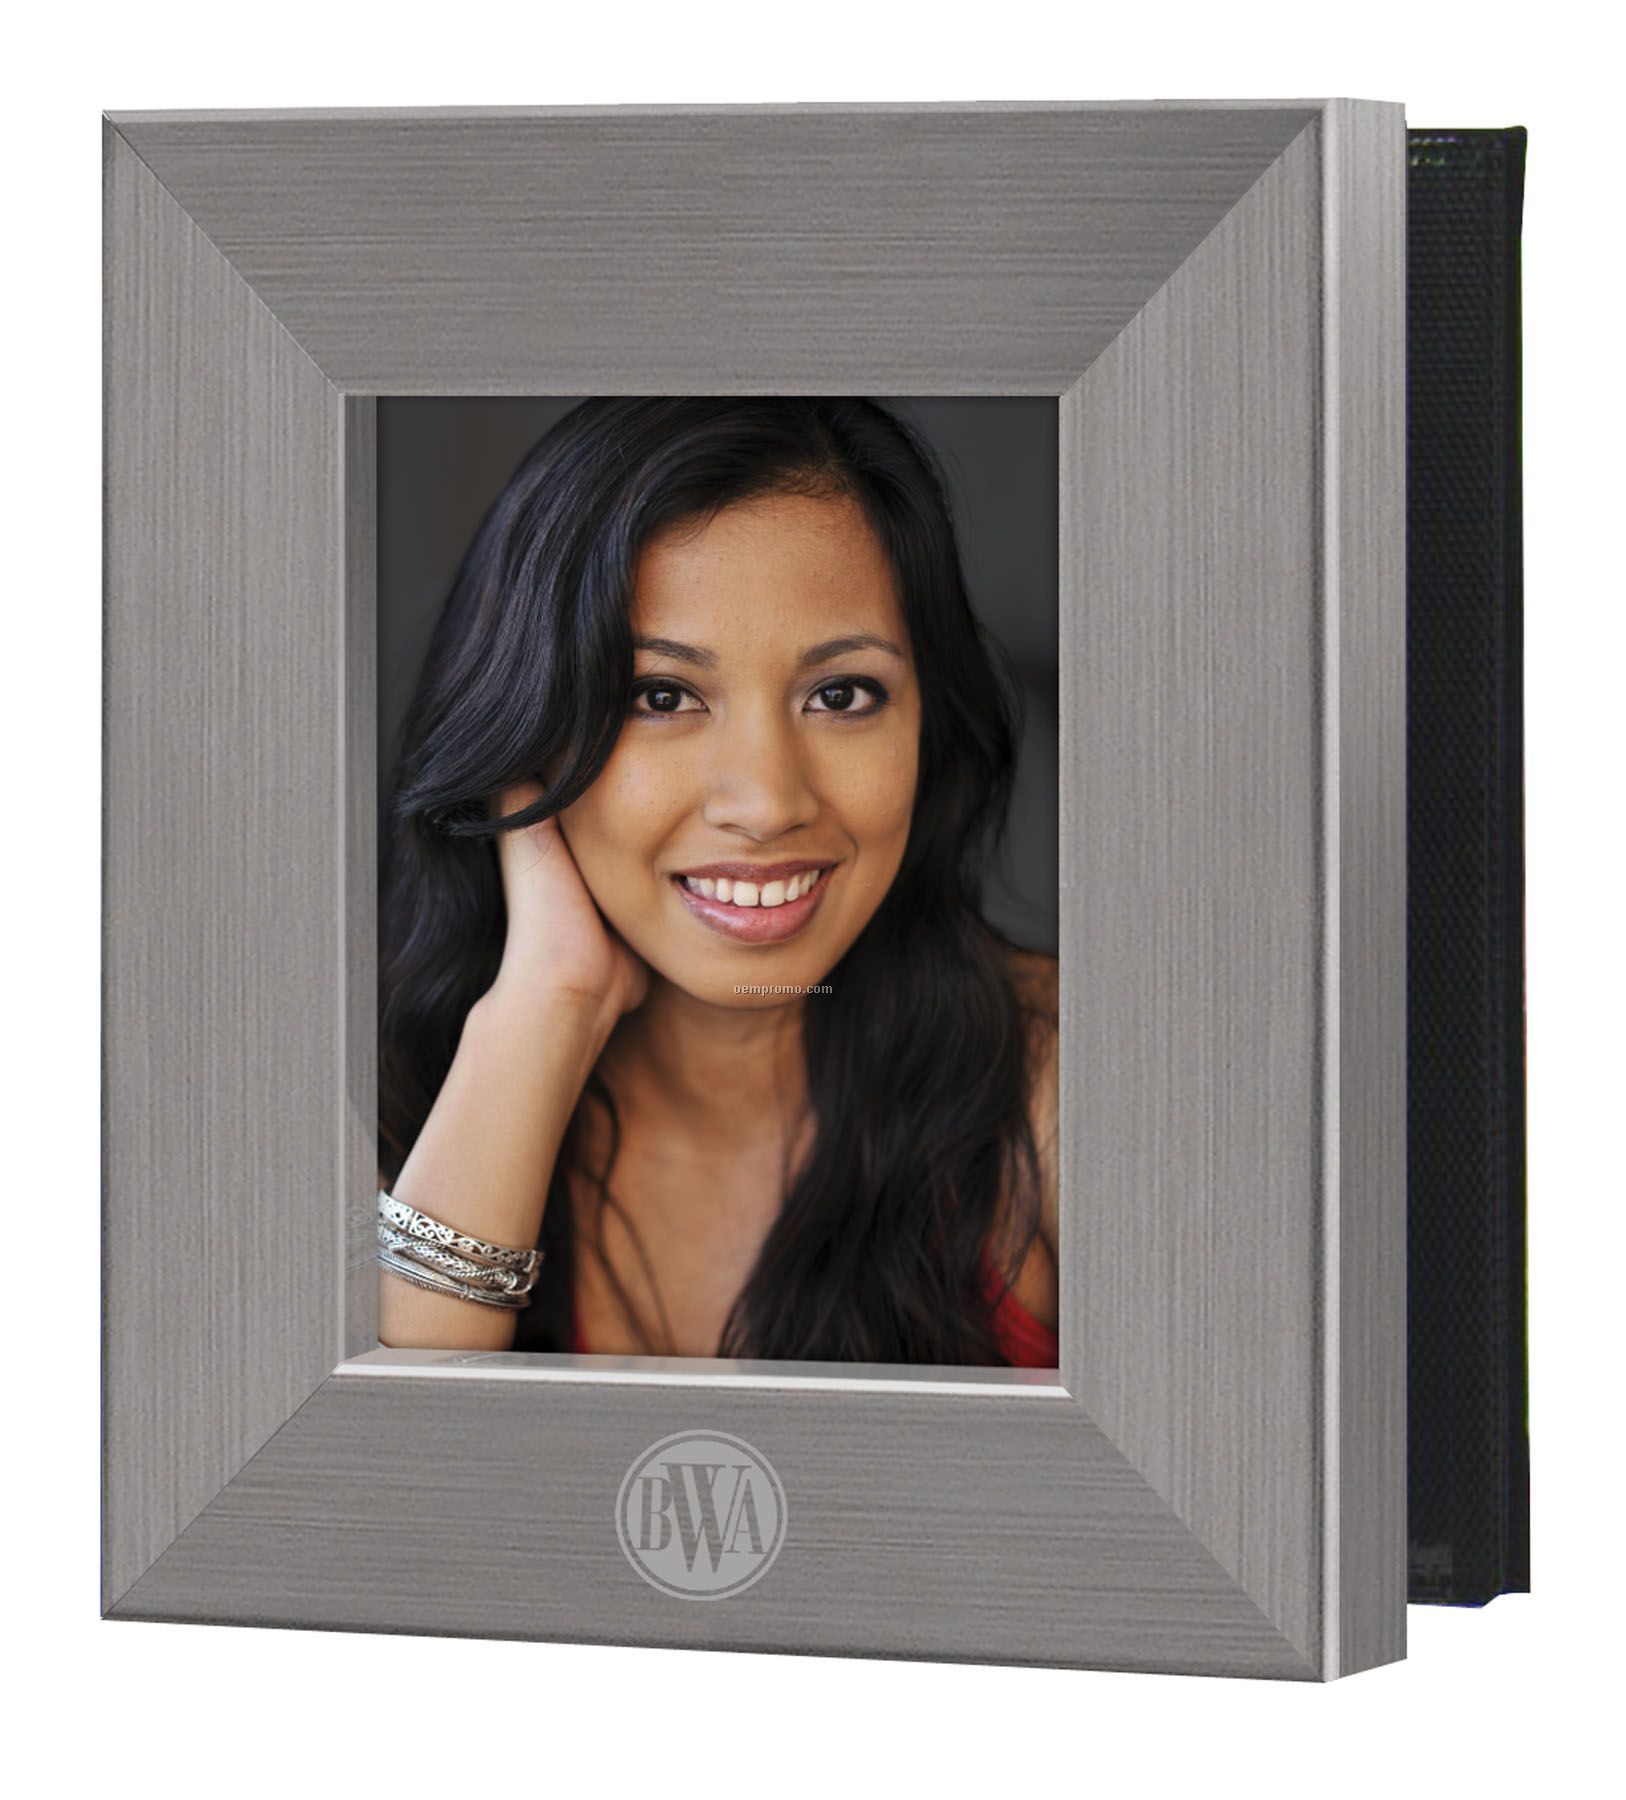 4"X6" Architectural Stainless Steel Photo Frame/ Album